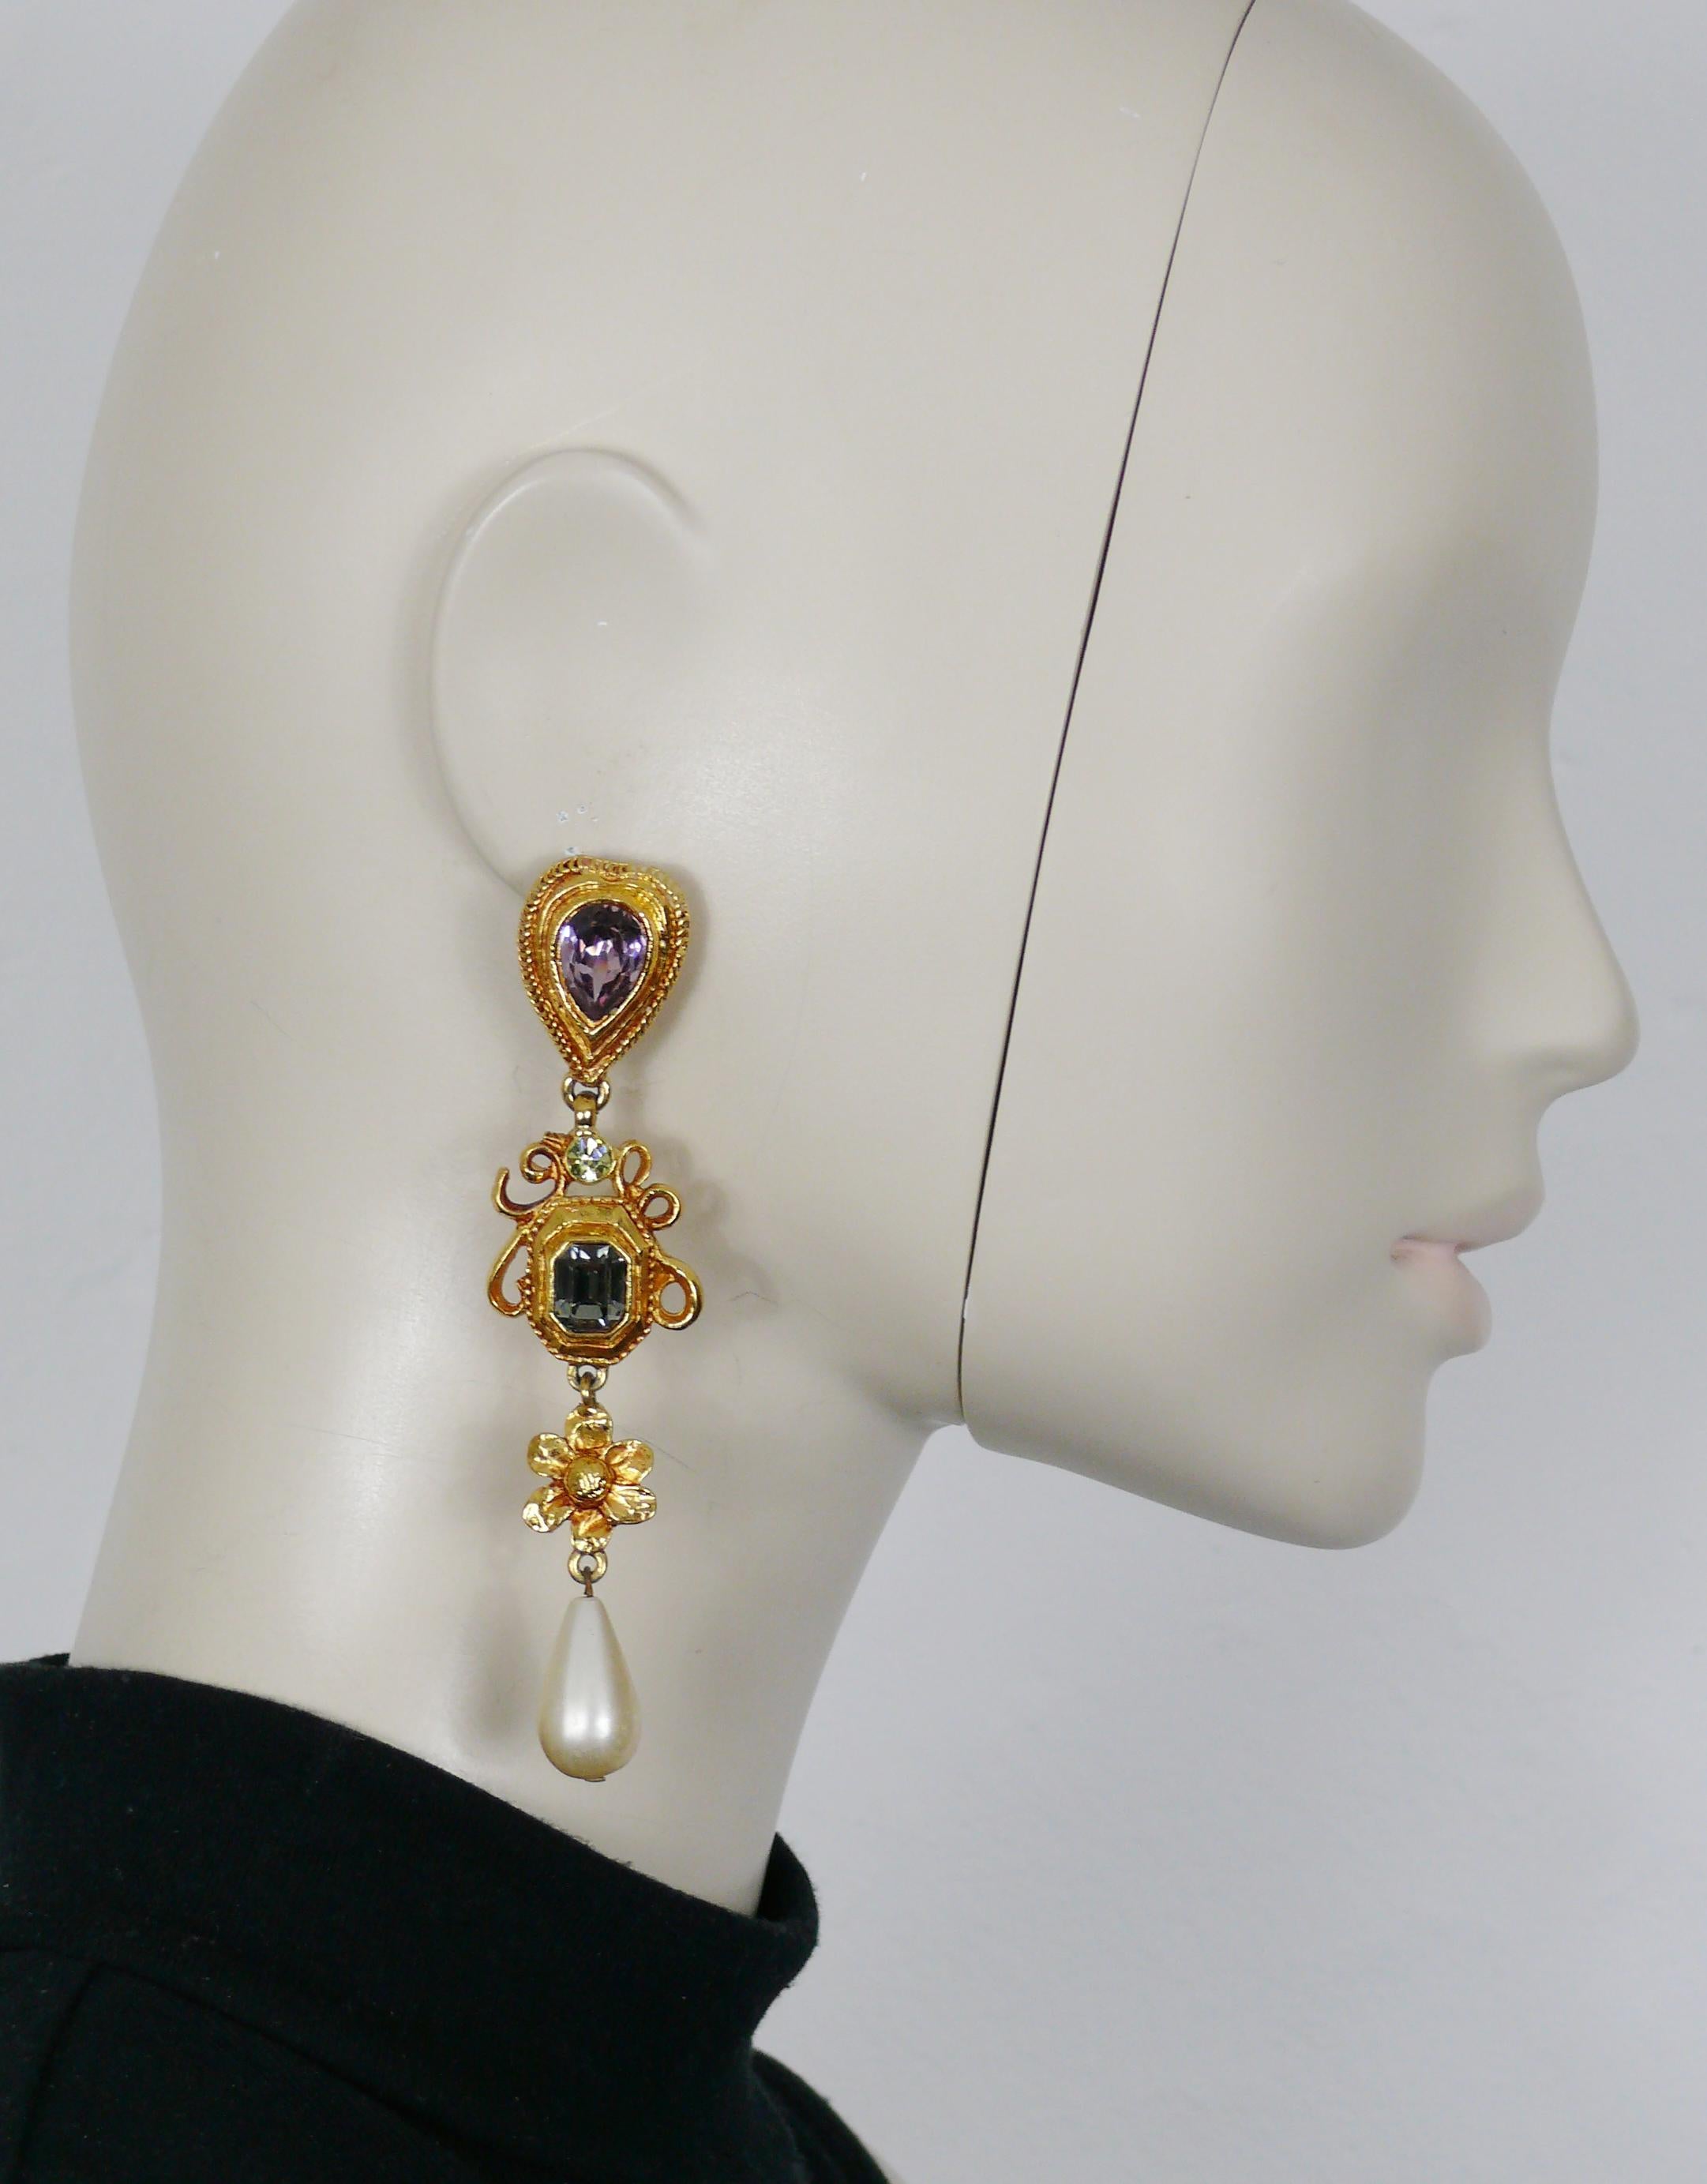 CHRISTIAN LACROIX vintage gold tone dangling earrings (clip-on) embellished with multicolored crystals and resin faux pearl drop.

Marked CHRISTIAN LACROIX CL Made in France.

Indicative measurements : height approx. 10.5 cm (4.13 inches) / max.